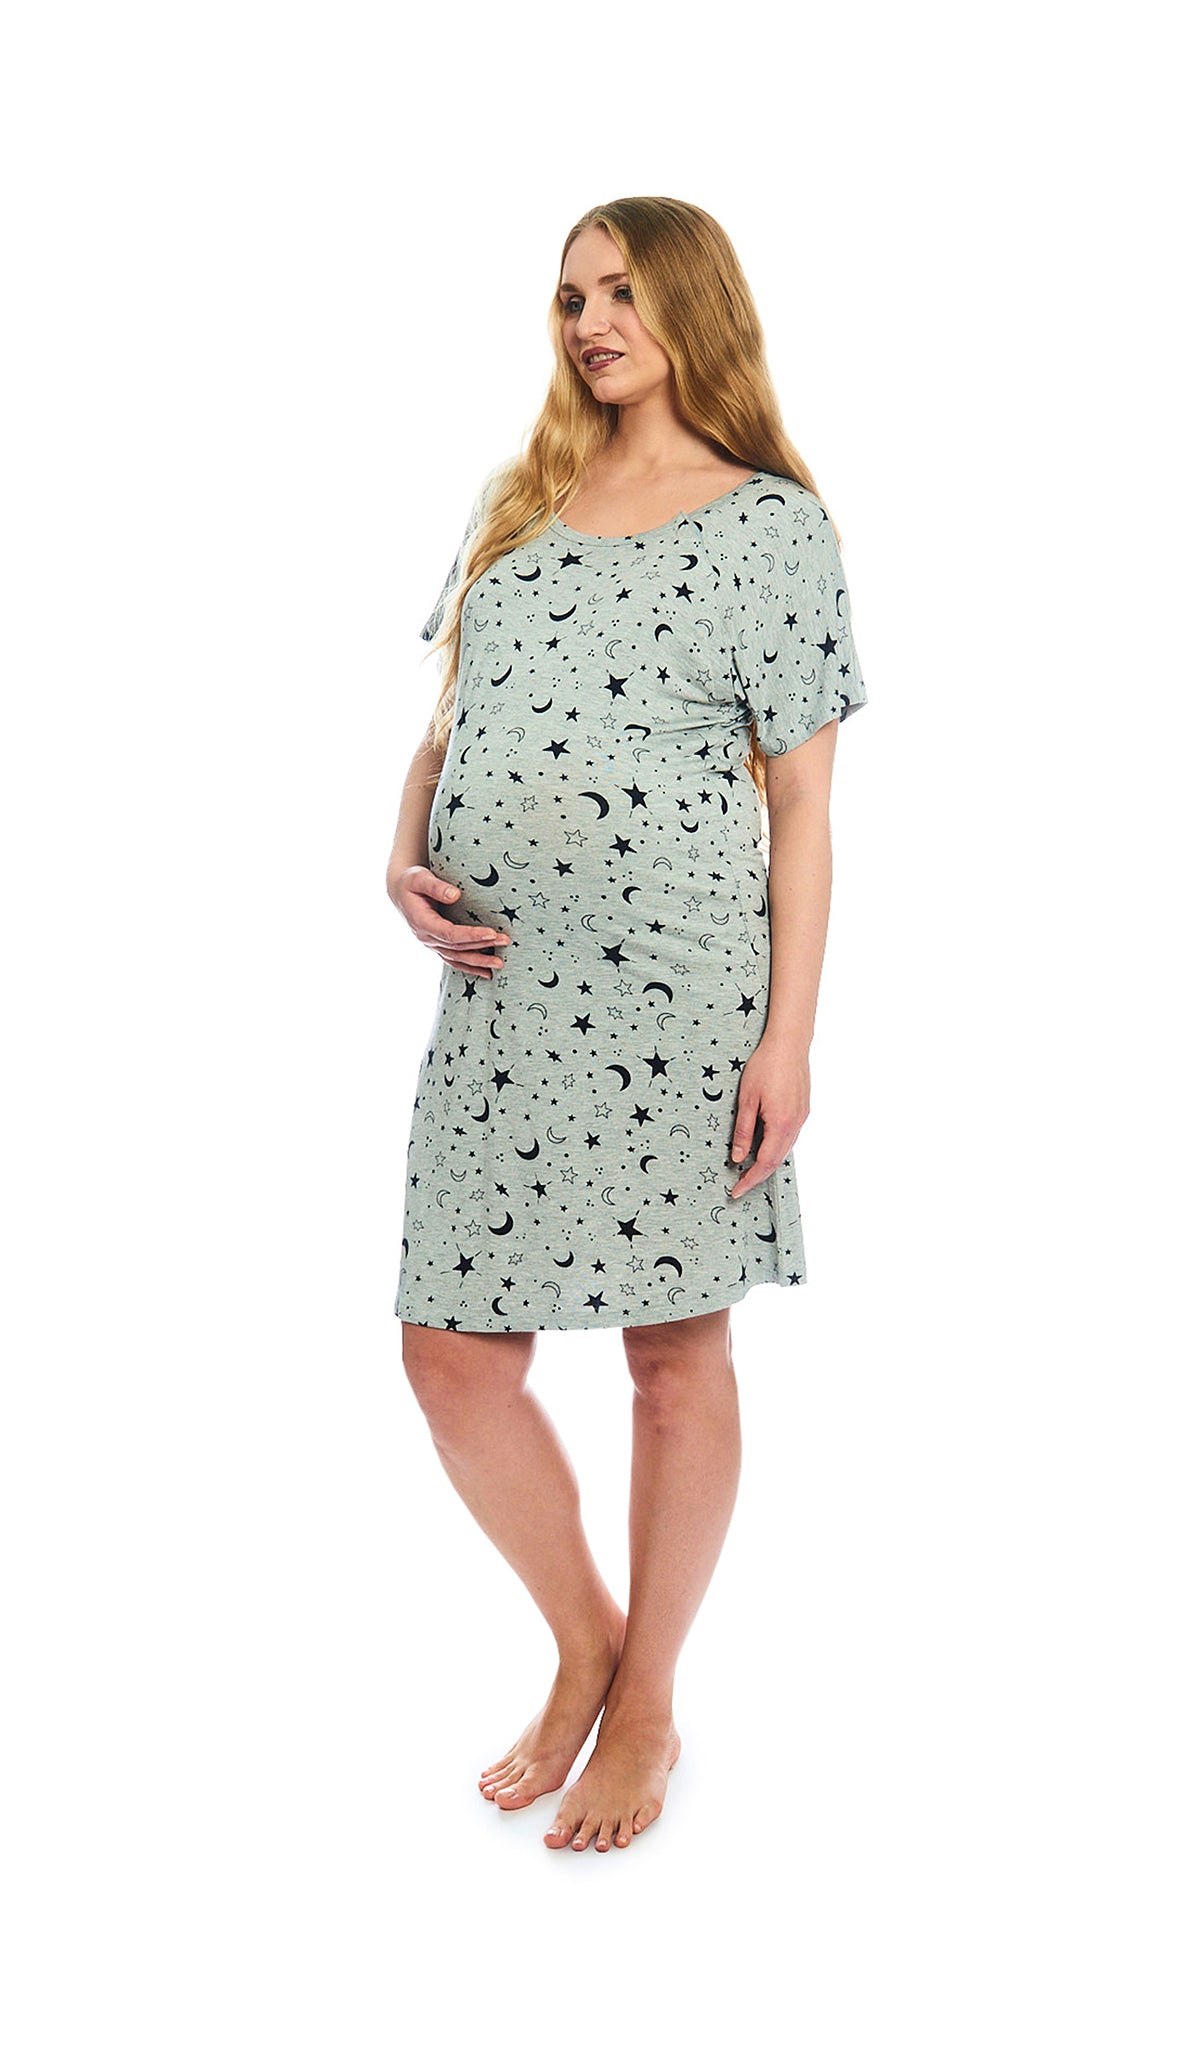 Twinkle Night Rosa hospital gown. Pregnant woman with one hand on belly, wearing hospital gown with scoop-neckline featuring dual snap openings. 